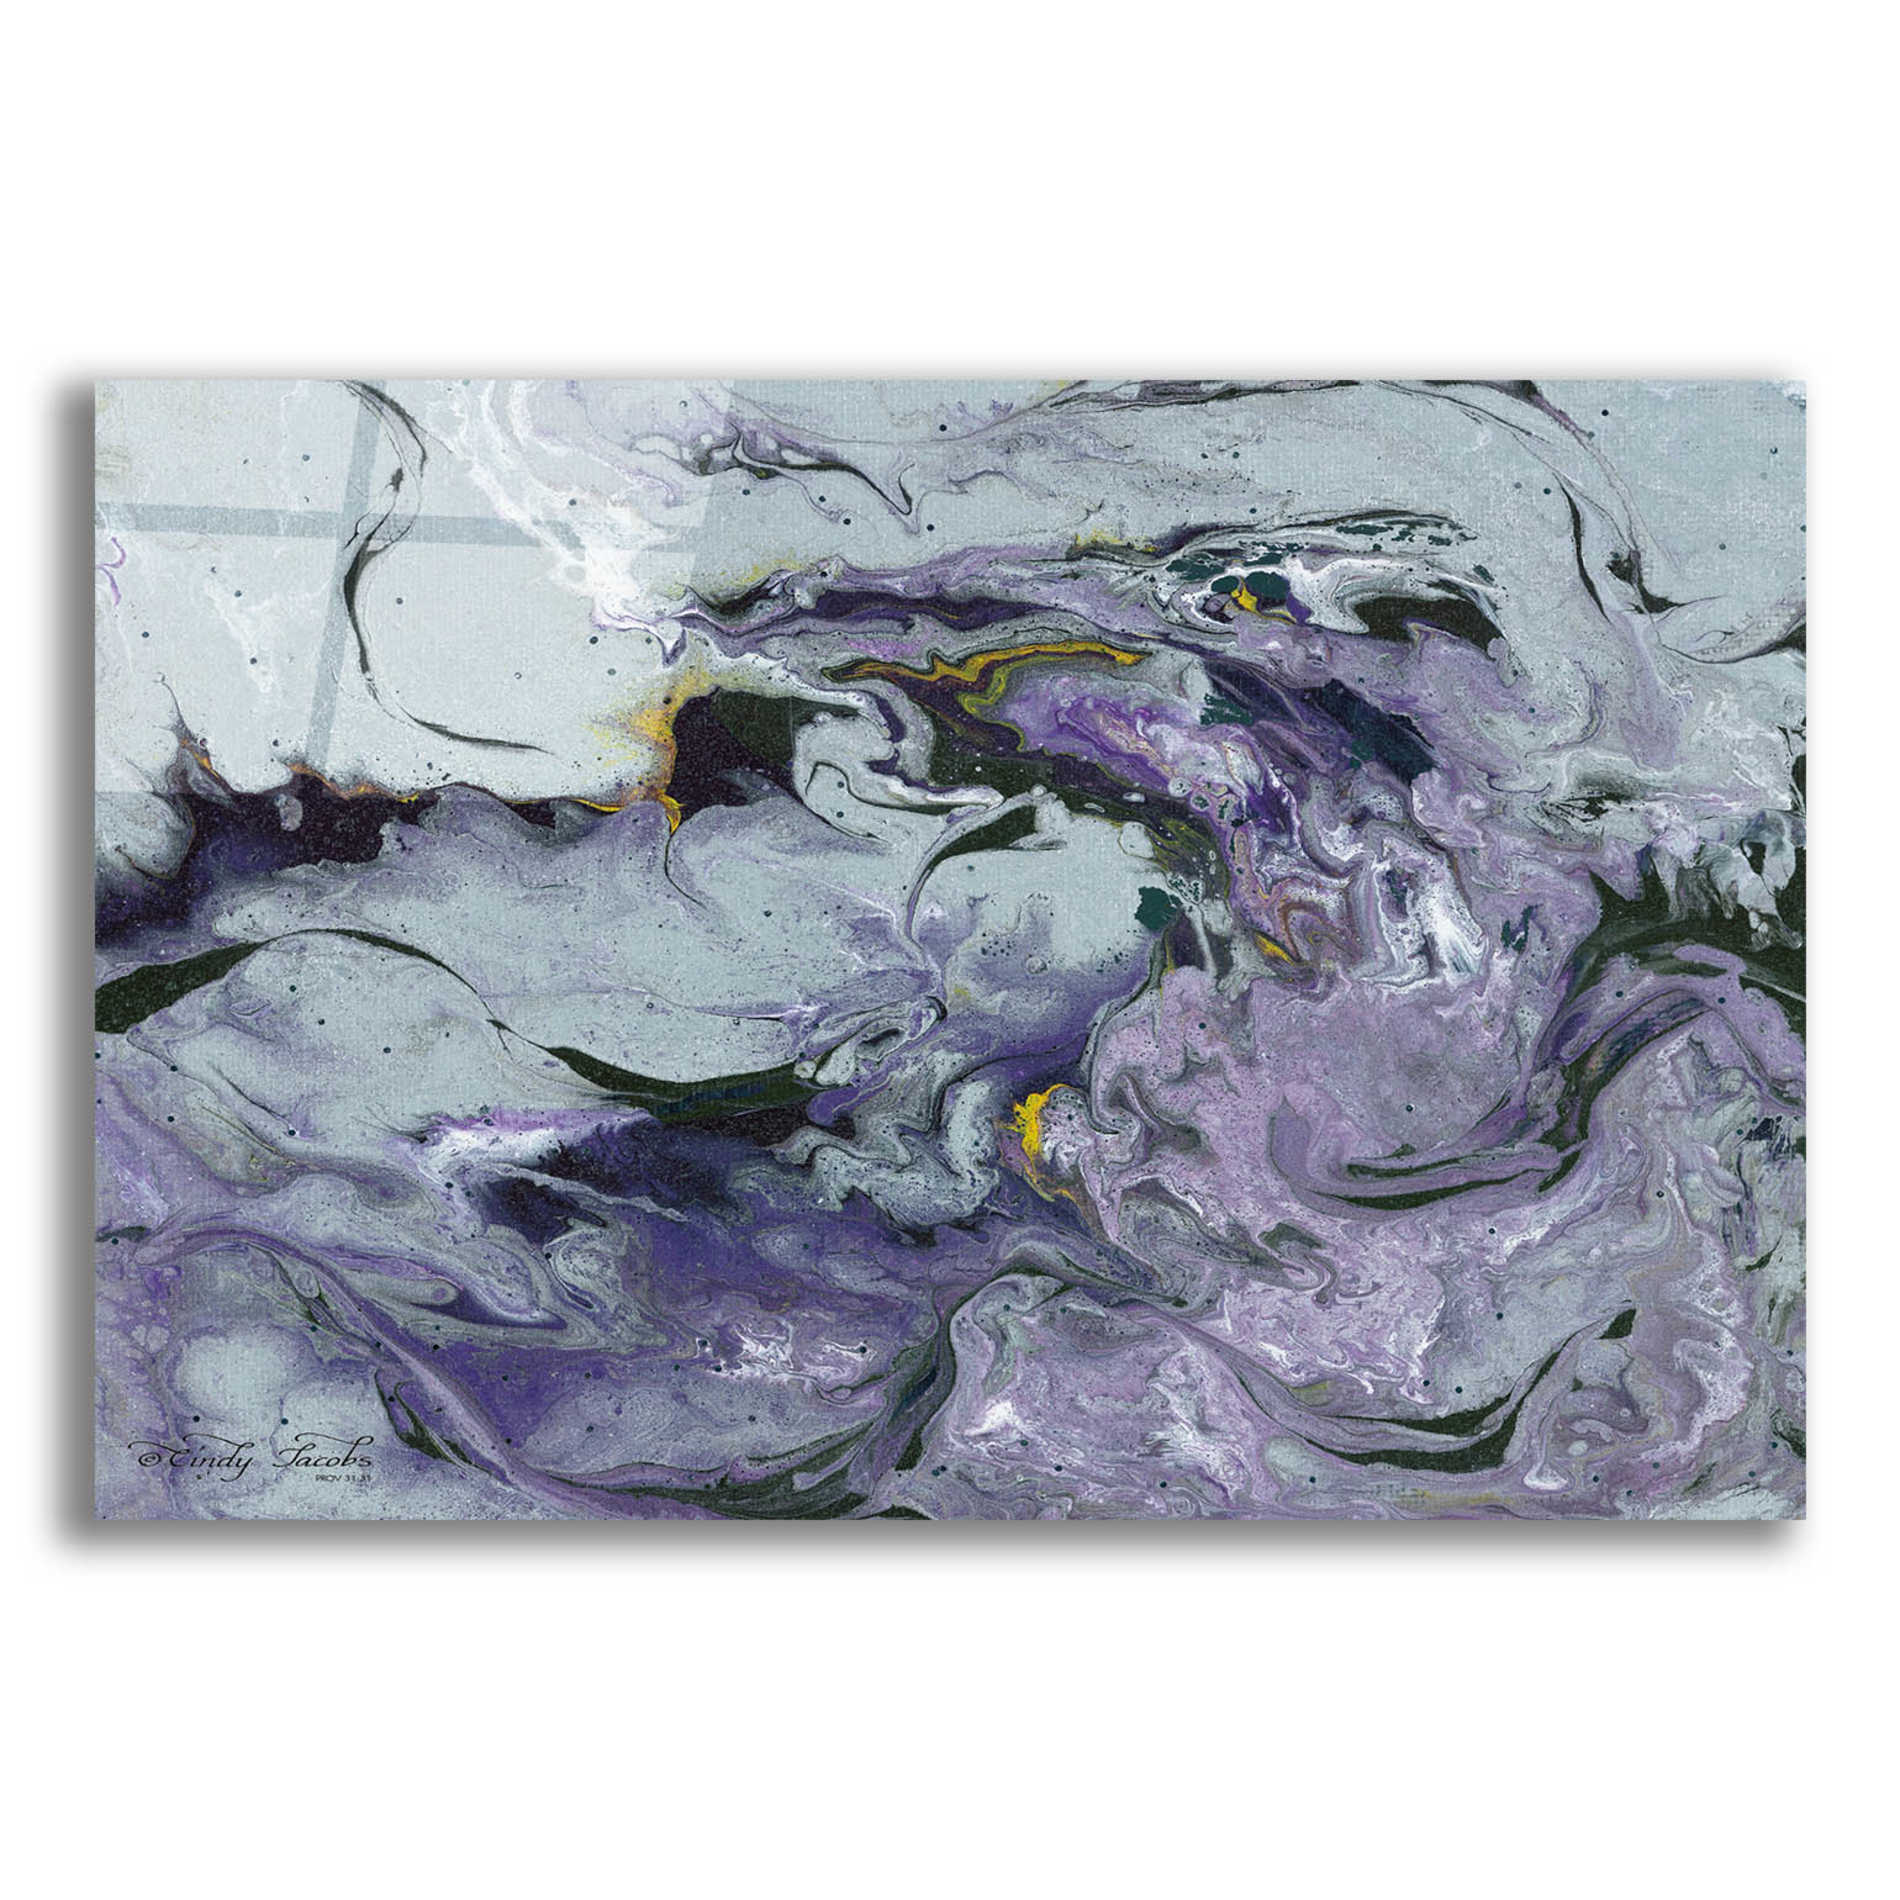 Epic Art 'Abstract in Purple IV' by Cindy Jacobs, Acrylic Glass Wall Art,16x12